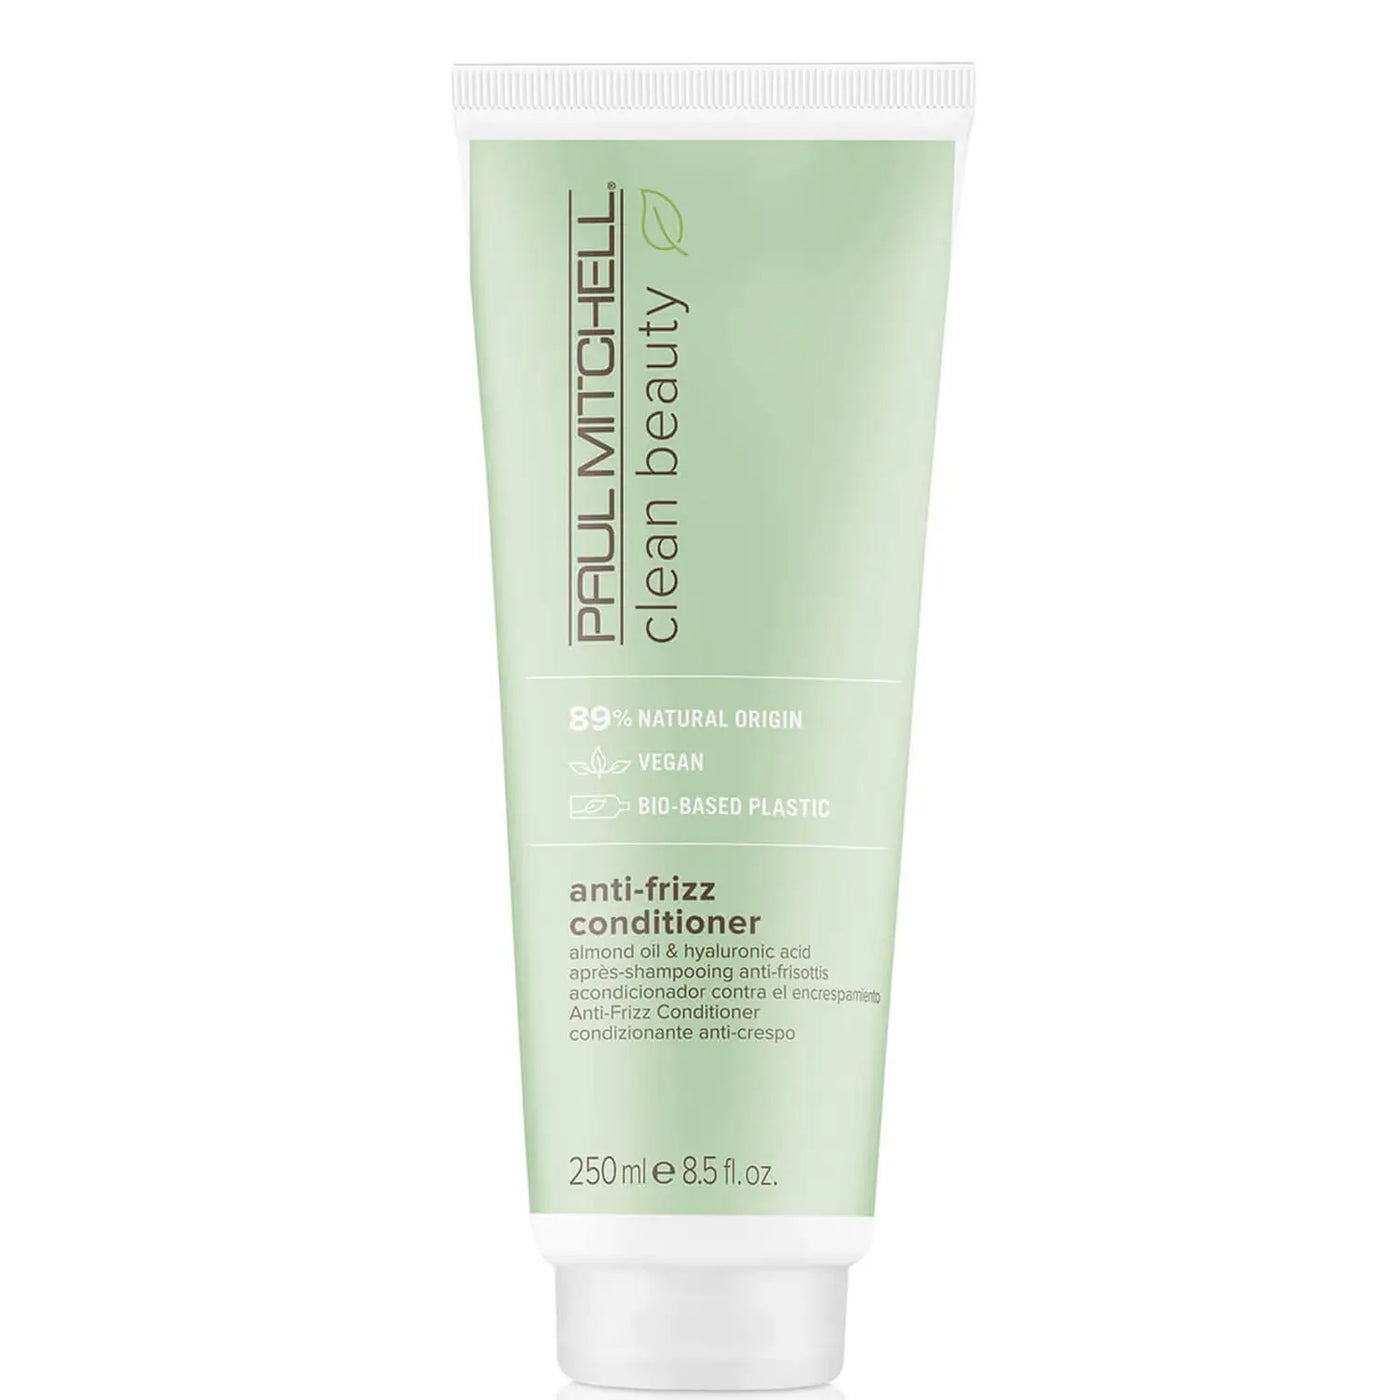 Clean Beauty by Paul Mitchell Anti-Frizz Conditioner 250ml